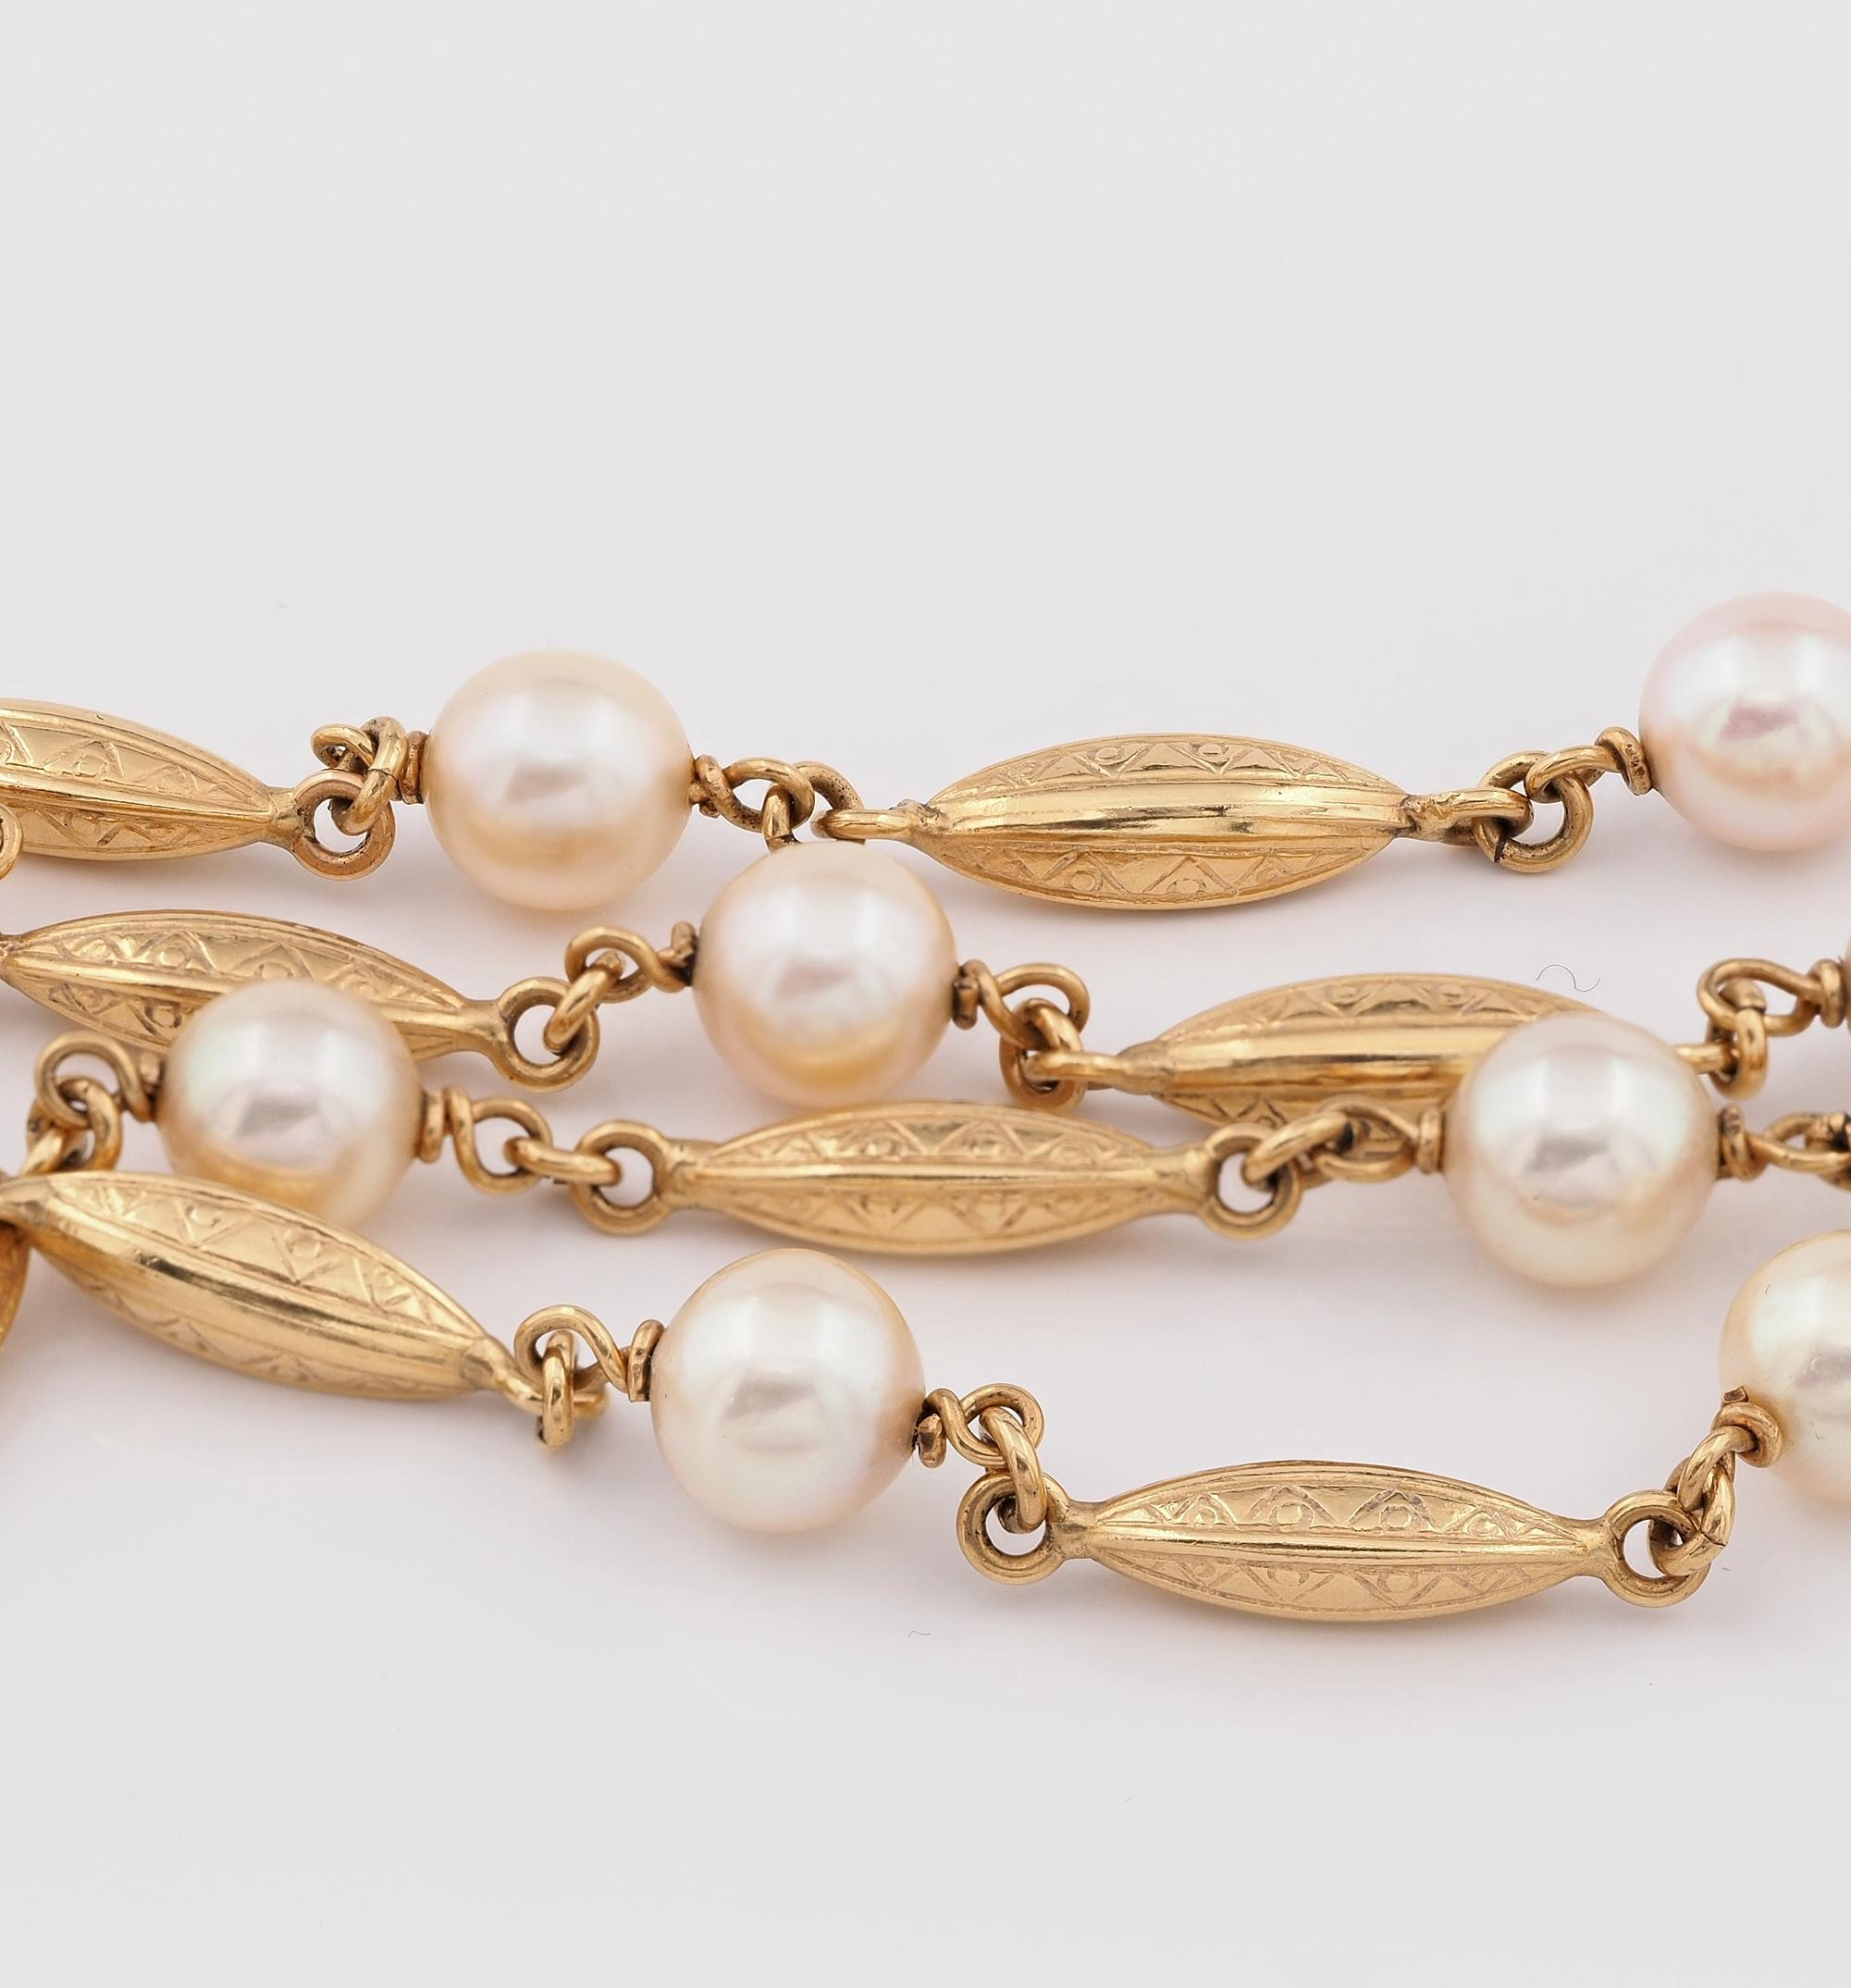 Unique Pearl Soutoir
This extremely charming long soutoir necklace dates 1930/35 ca
It is beautifully made by alternated cultured Pearl and solids gold links with lovely geometric decorations for a truly charming and effective result
Marked for gold